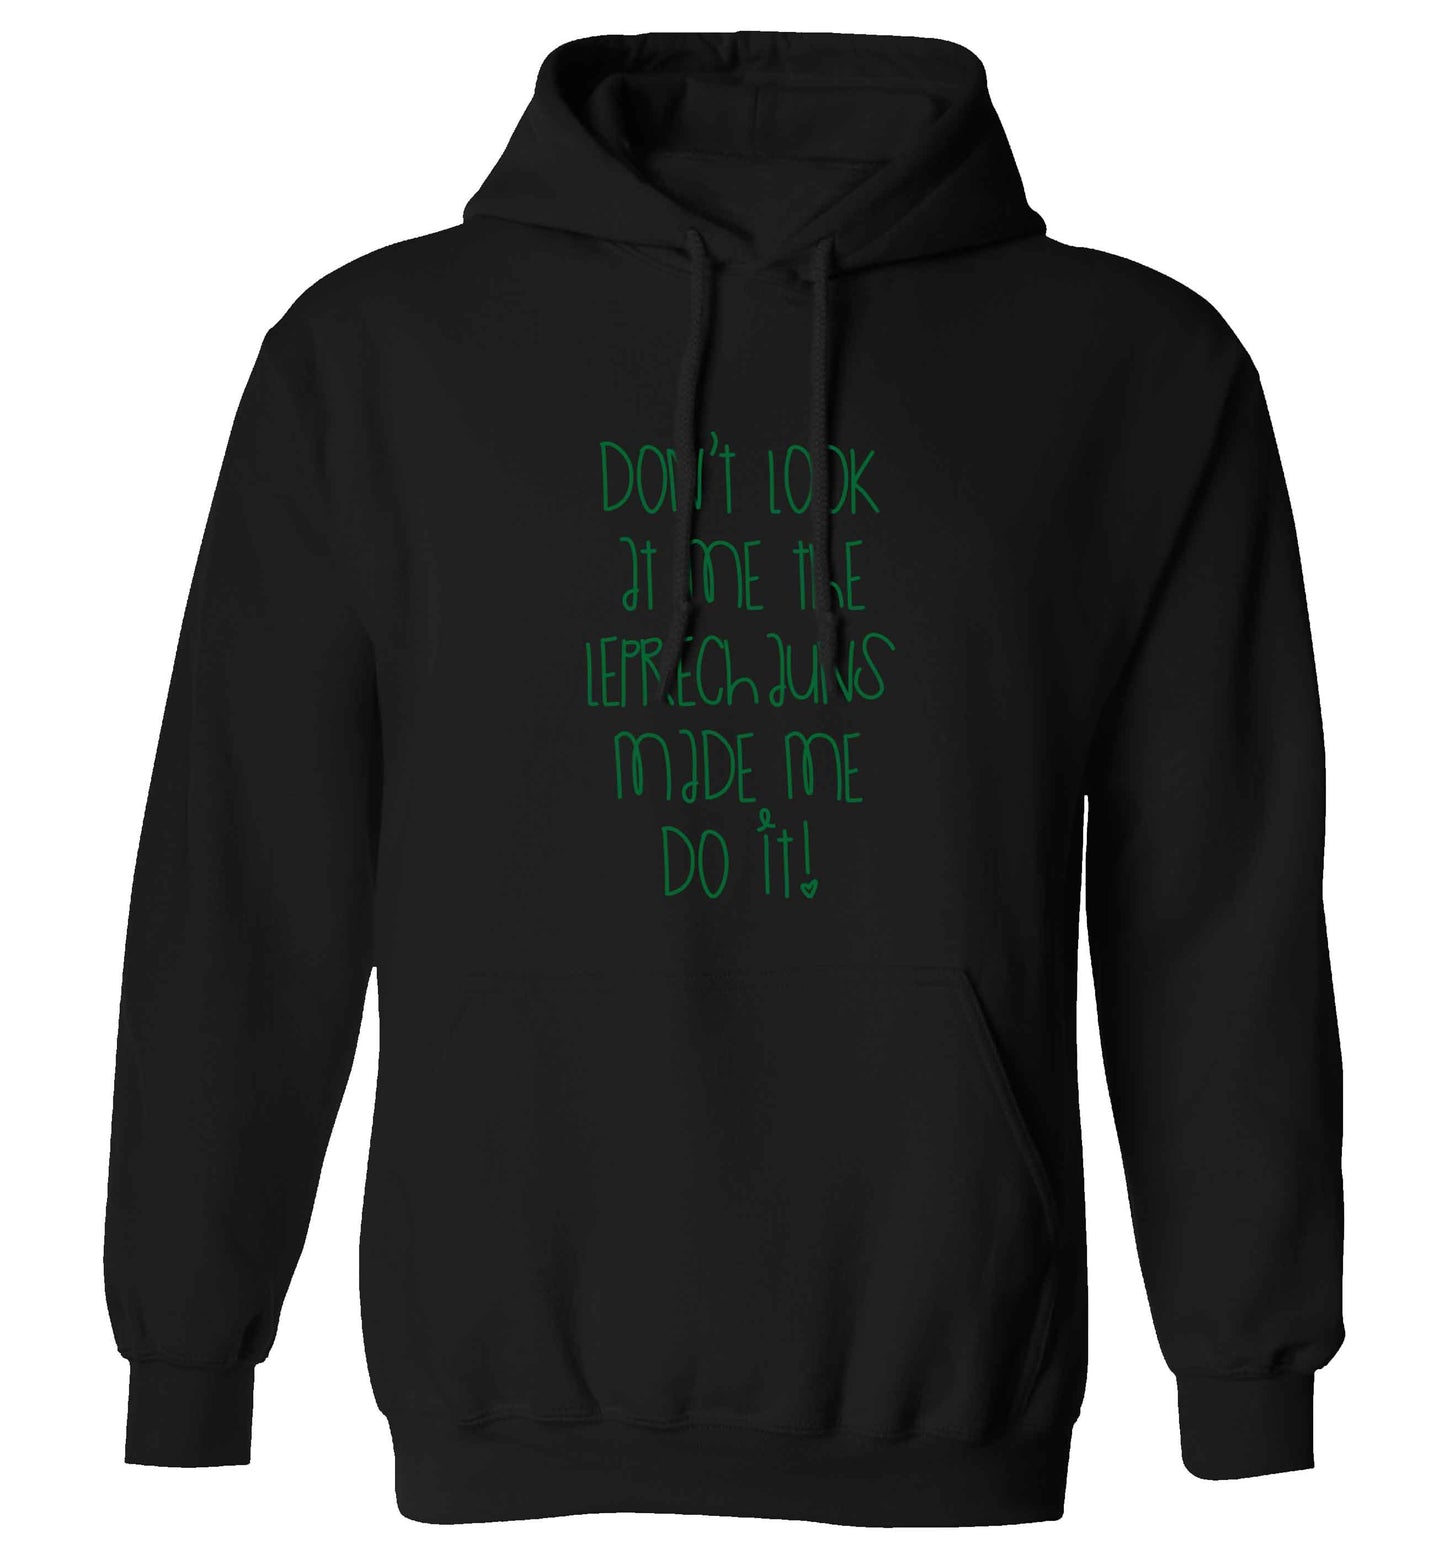 Don't look at me the leprechauns made me do it adults unisex black hoodie 2XL